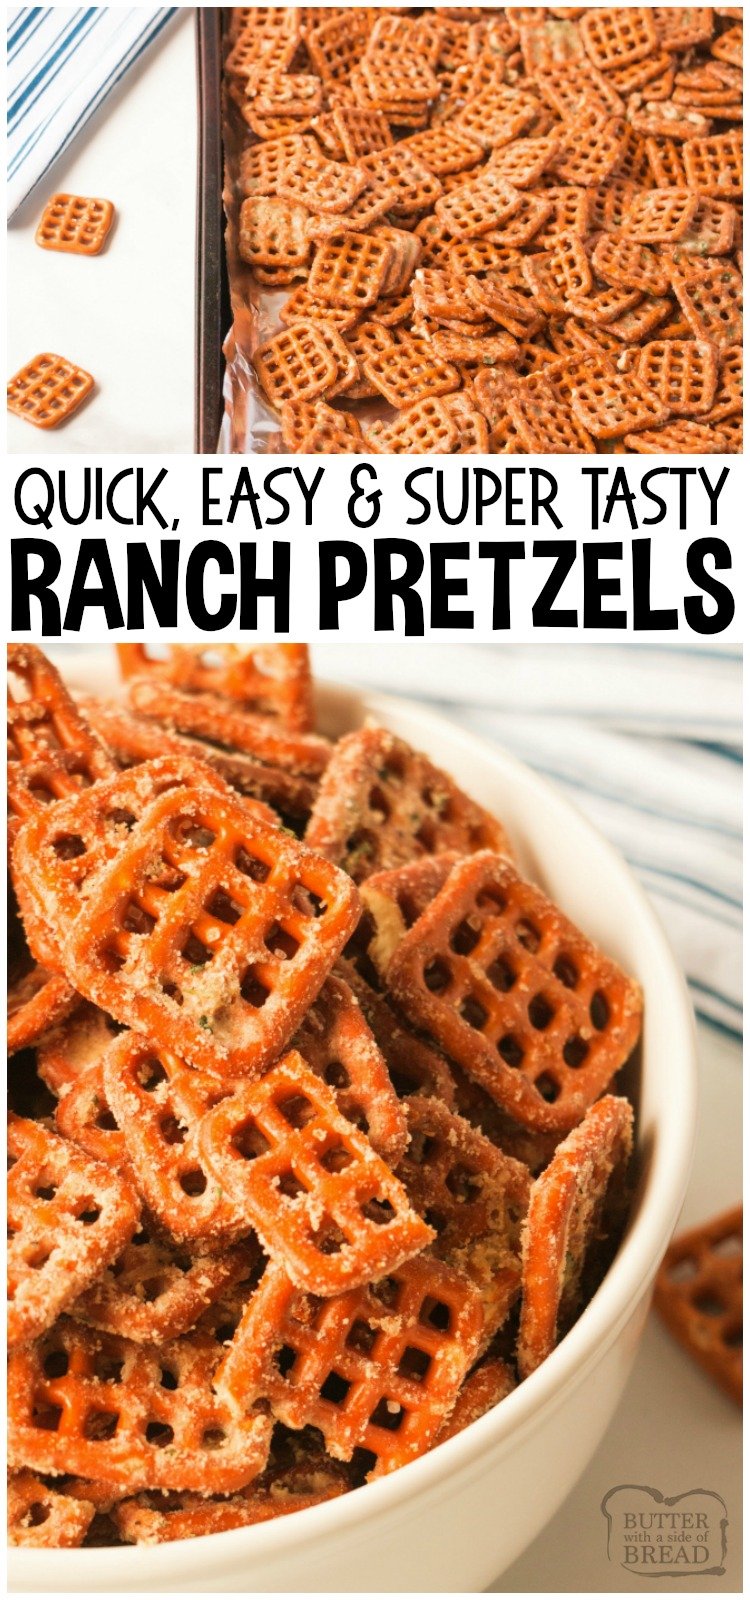 Easy Ranch Pretzels made with just a few ingredients and so insanely delicious, everyone asks for this recipe! Simple appetizer to make and perfect for game day, a party or any get-together! #ranch #pretzels #snacks #food #appetizers #recipe from BUTTER WITH A SIDE OF BREAD